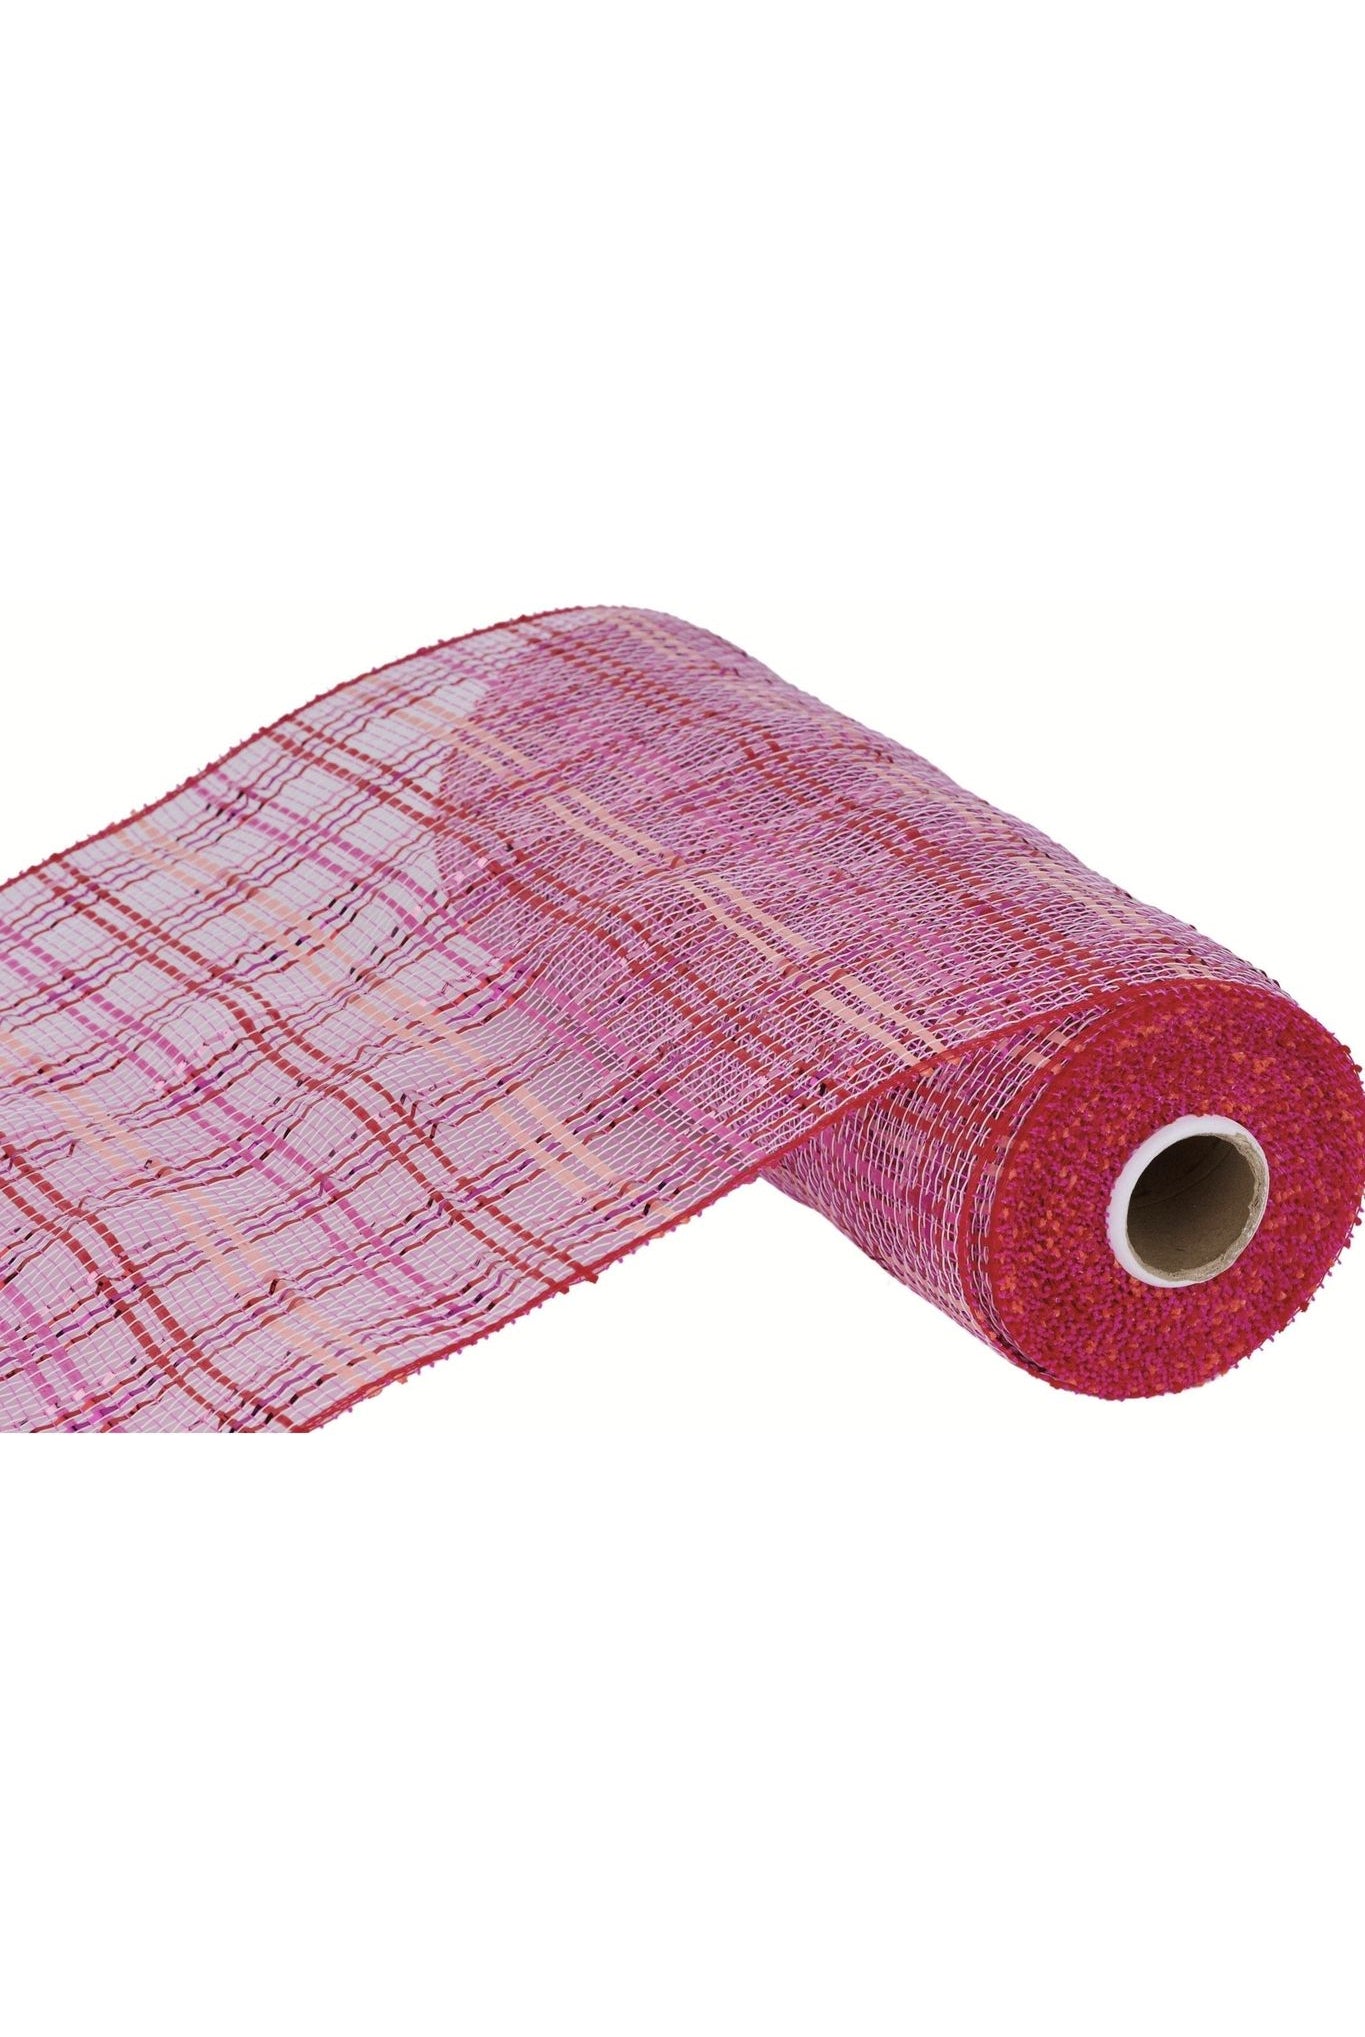 Shop For 10" Vertical Foil Plaid Mesh: Pink and Red (10 Yards) RE136866